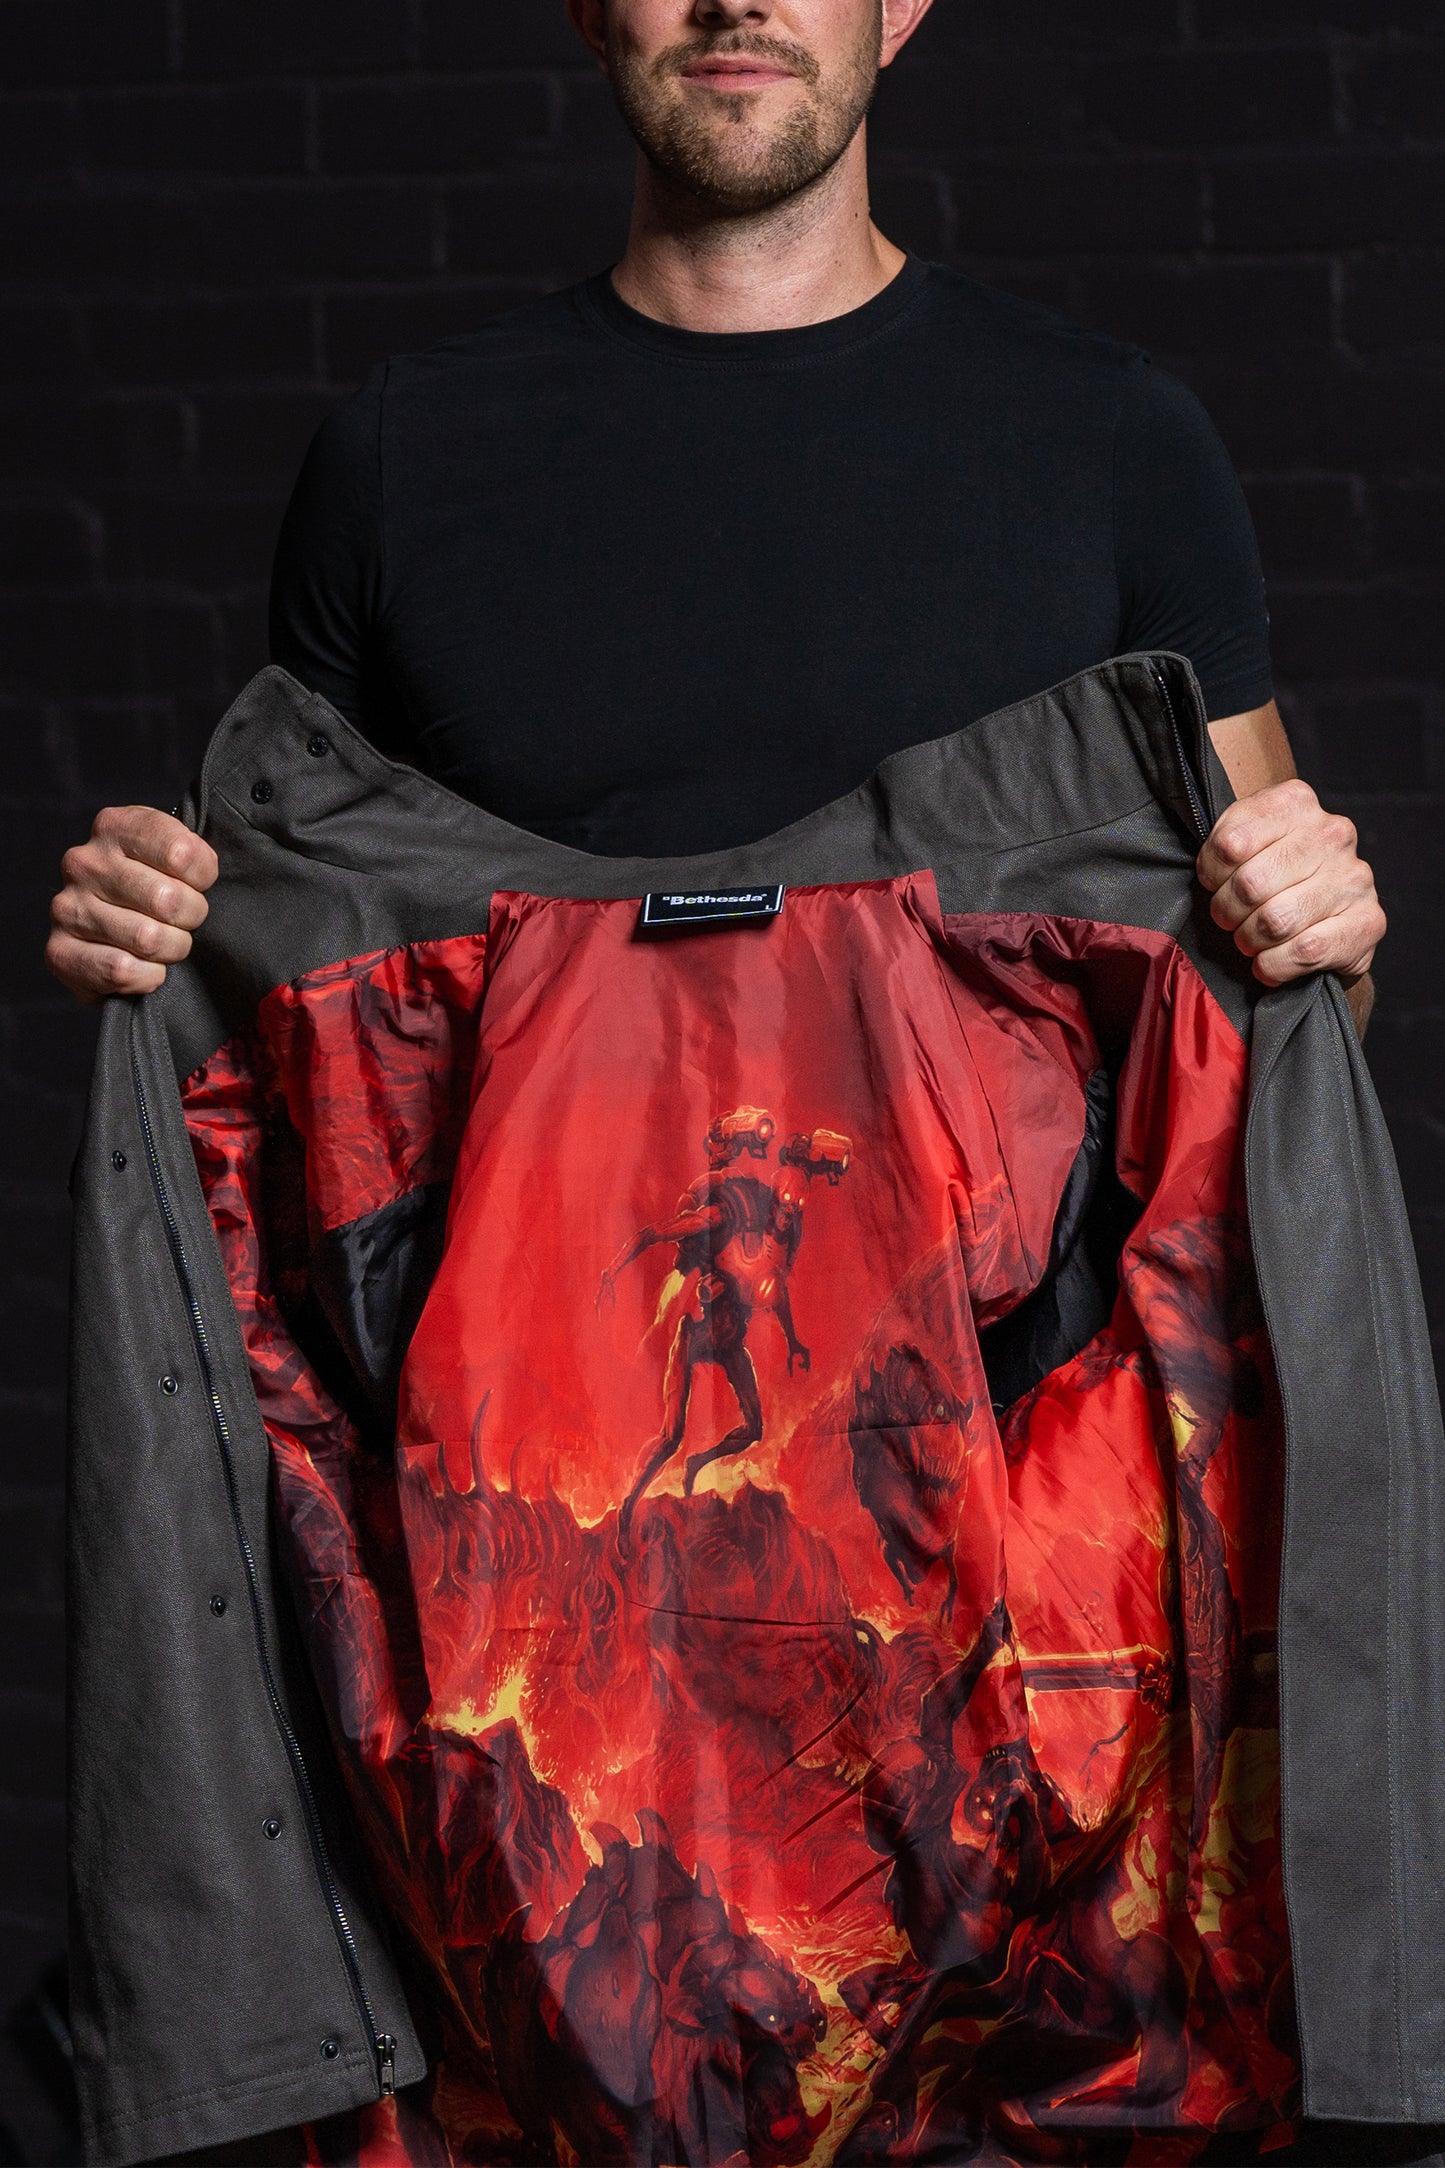 Image of the DOOM Slayer Hooded Jacket unzipped showing the internal print